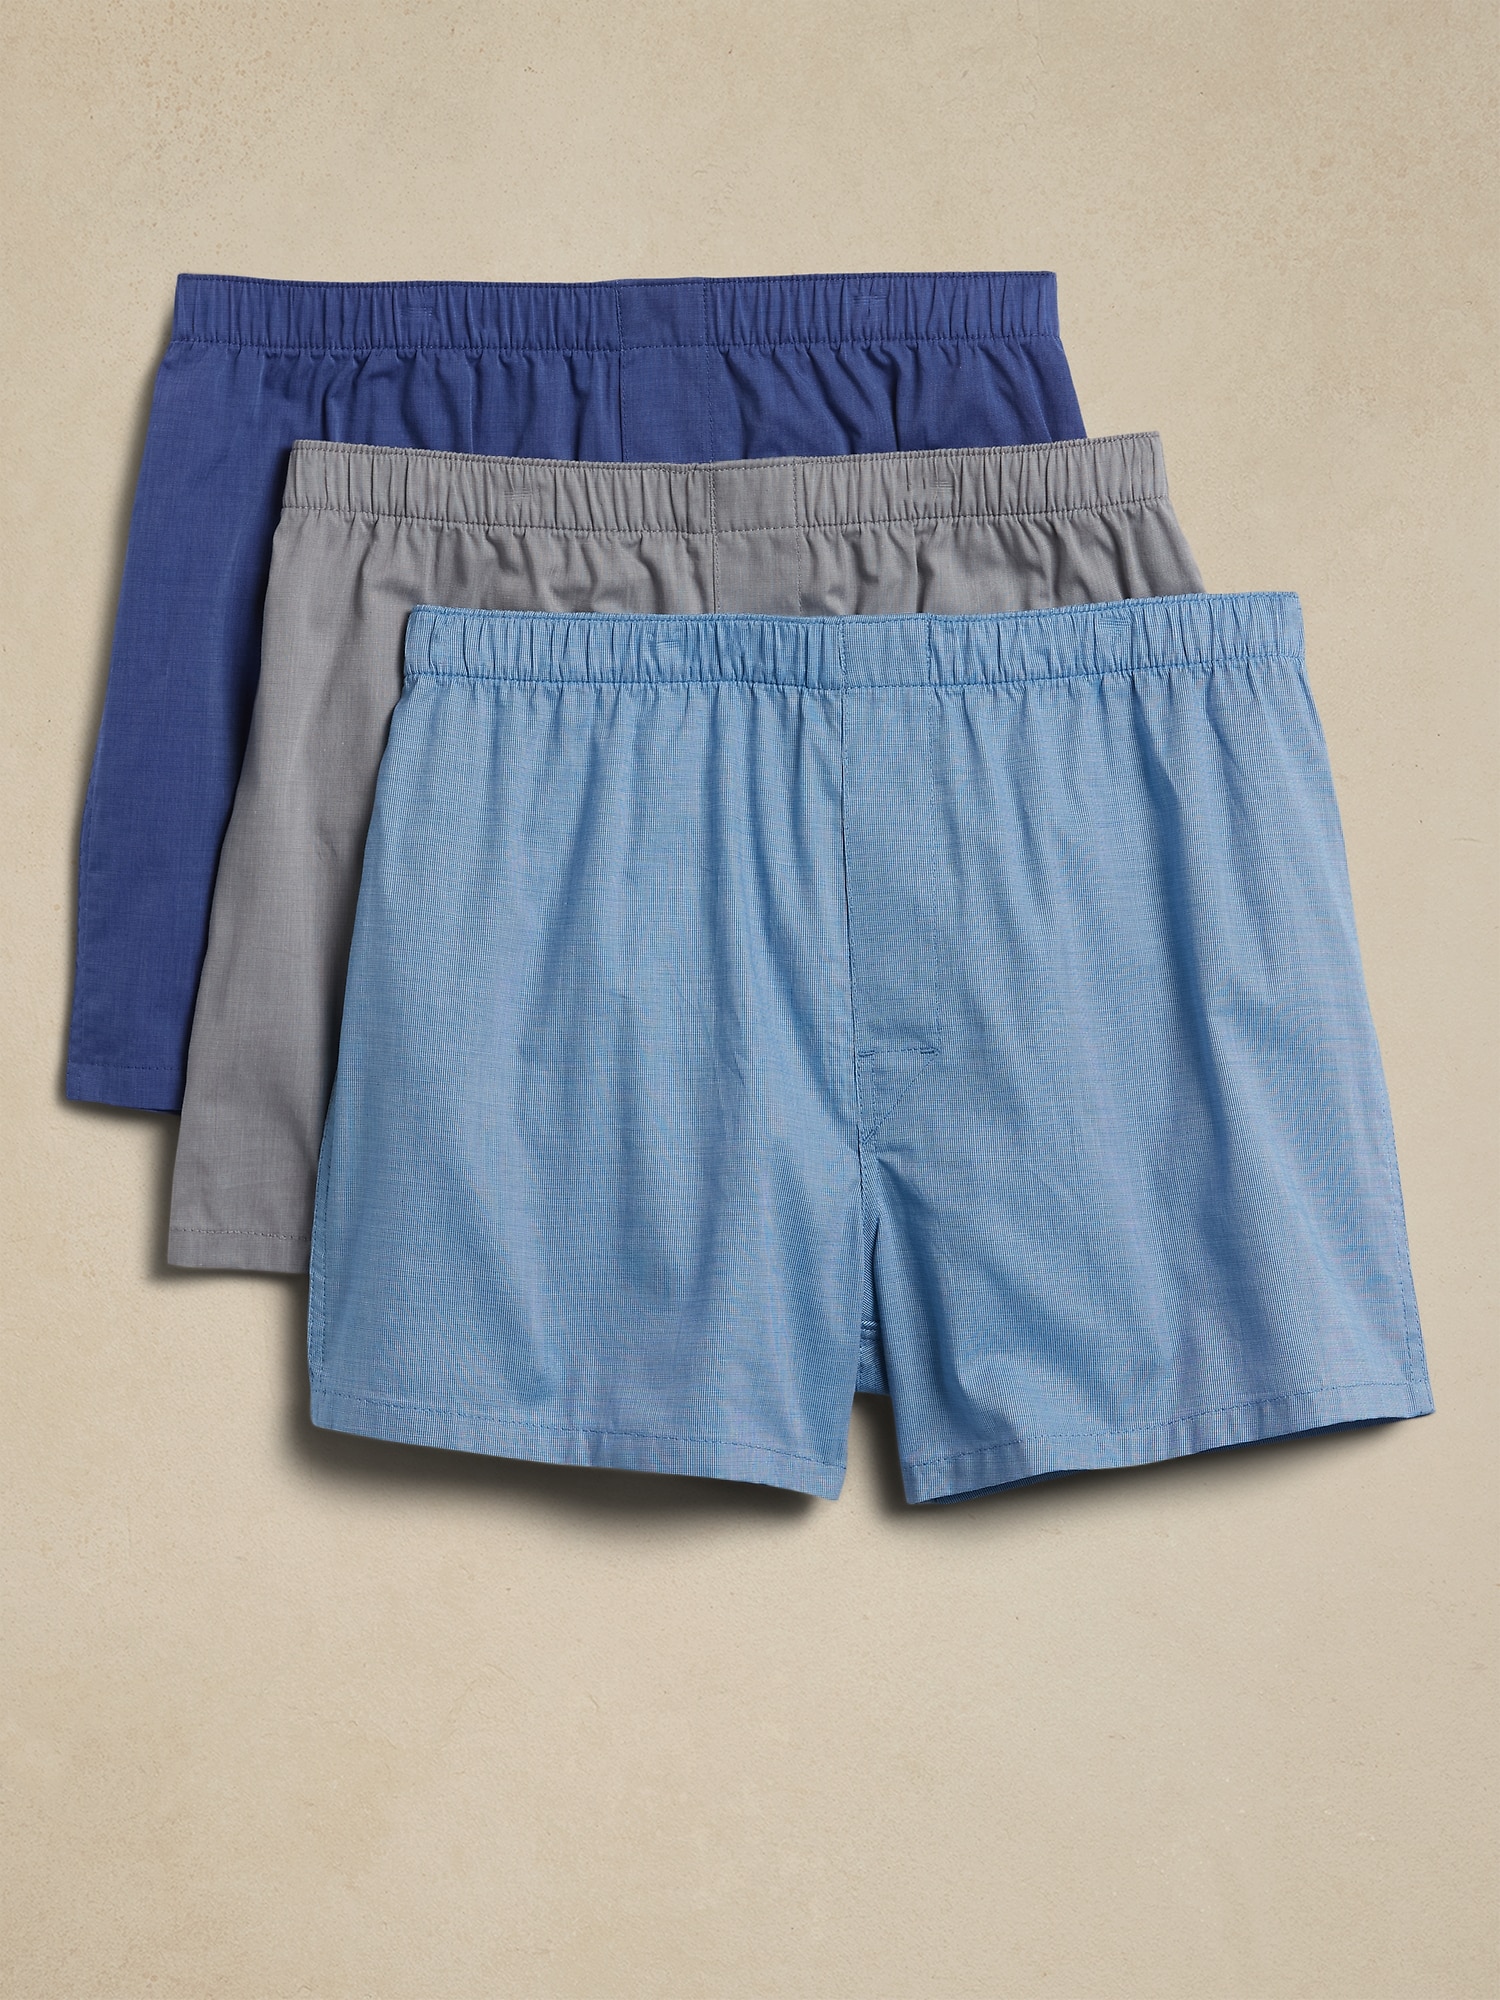 Cotton Boxers (3-Pack)